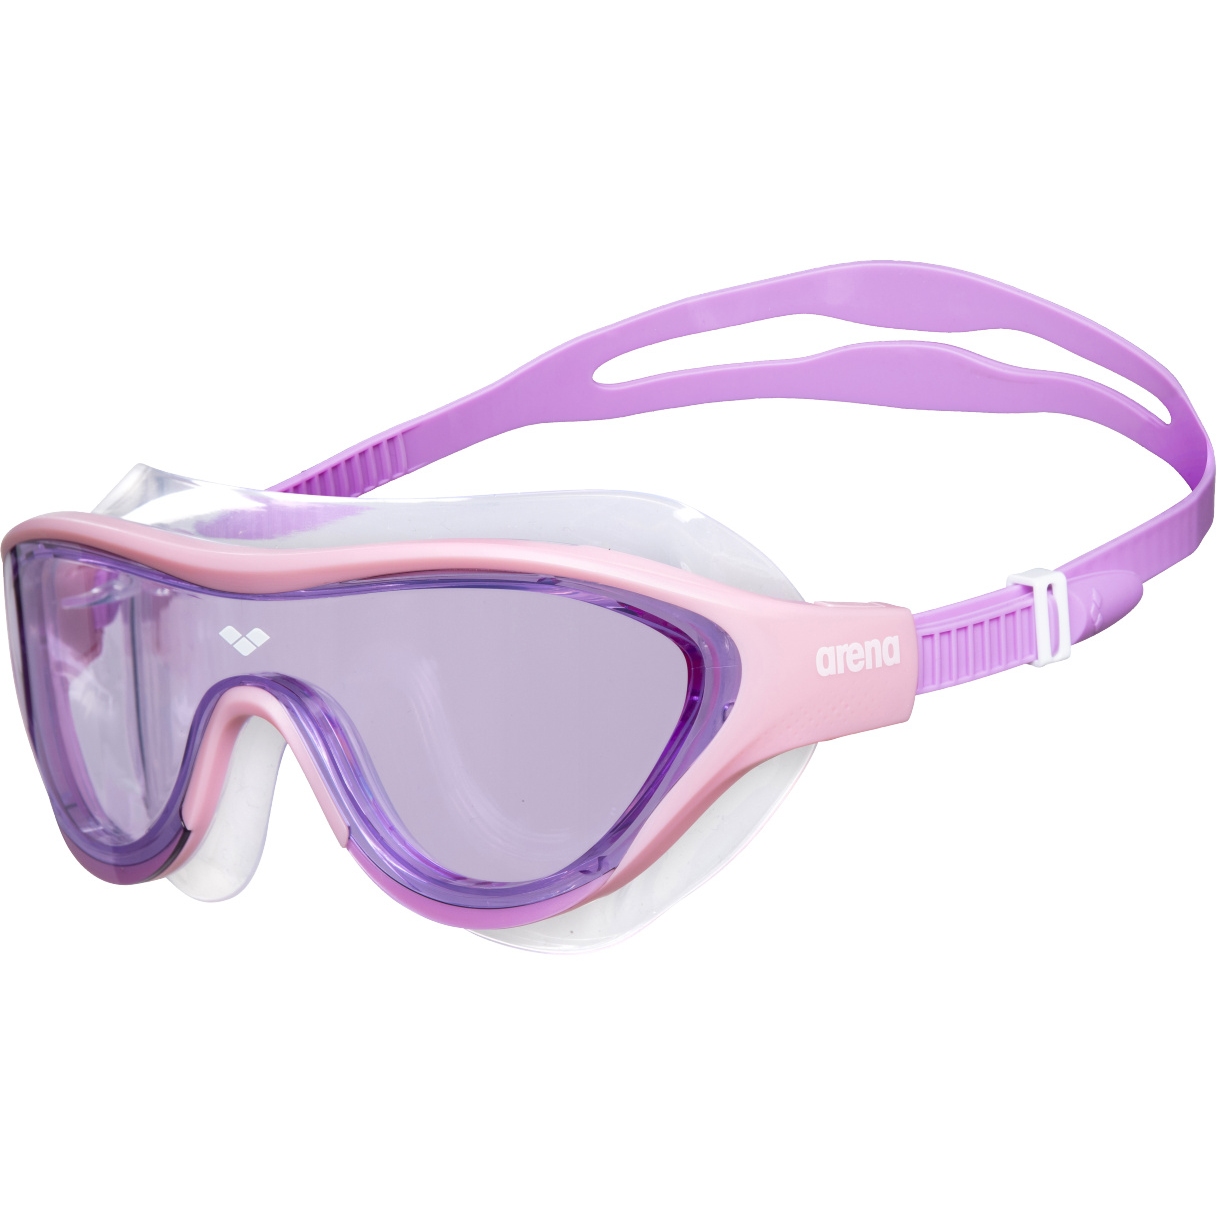 Picture of arena The One Mask Swimming Goggles Junior - Pink - Pink-Violet